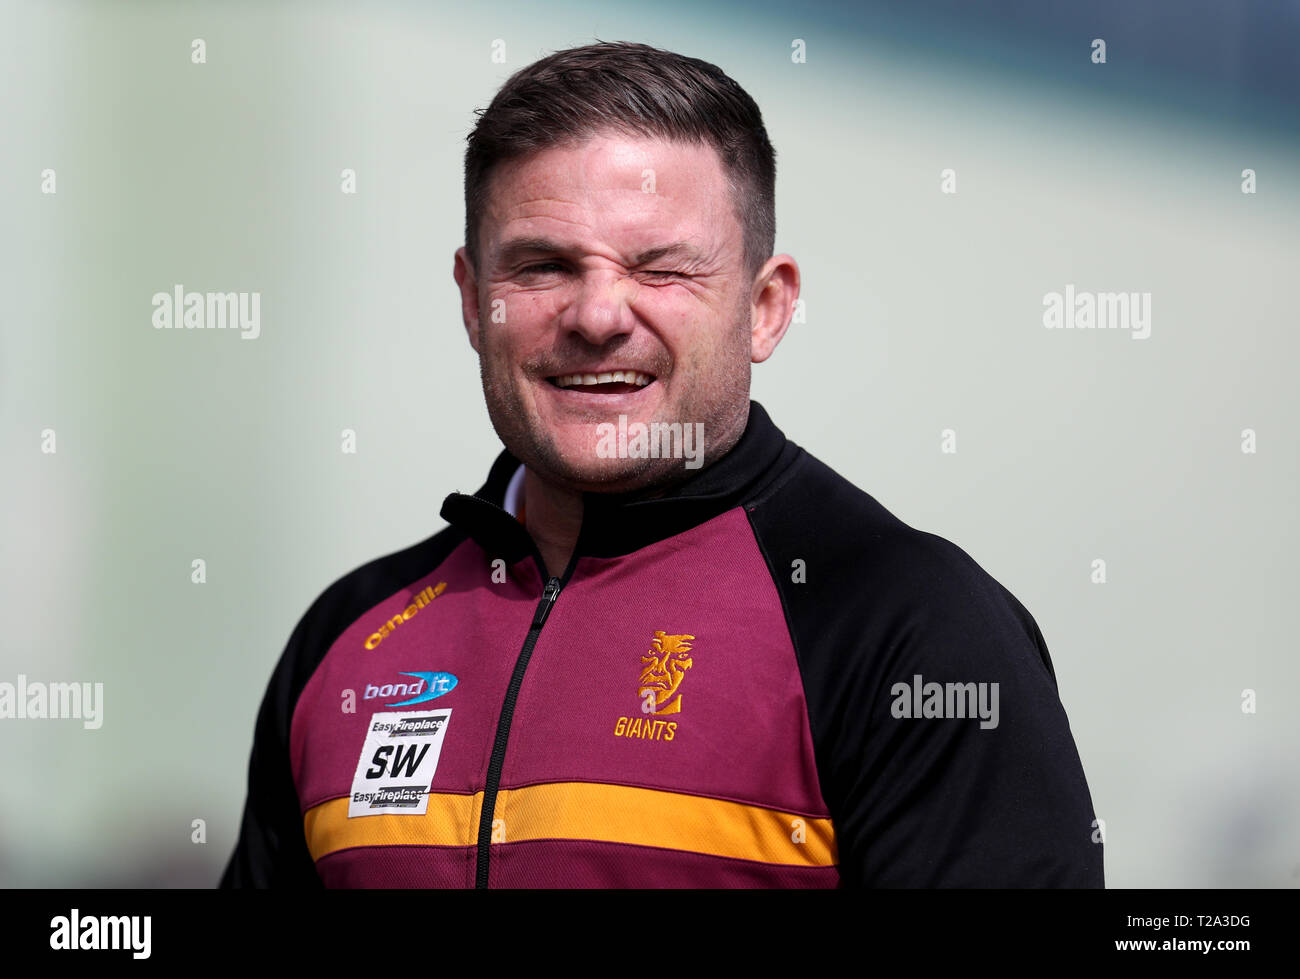 Huddersfield Giants coach Simon Woolford during the Betfred Super League match at Trailfinders Sports Club, London. Stock Photo